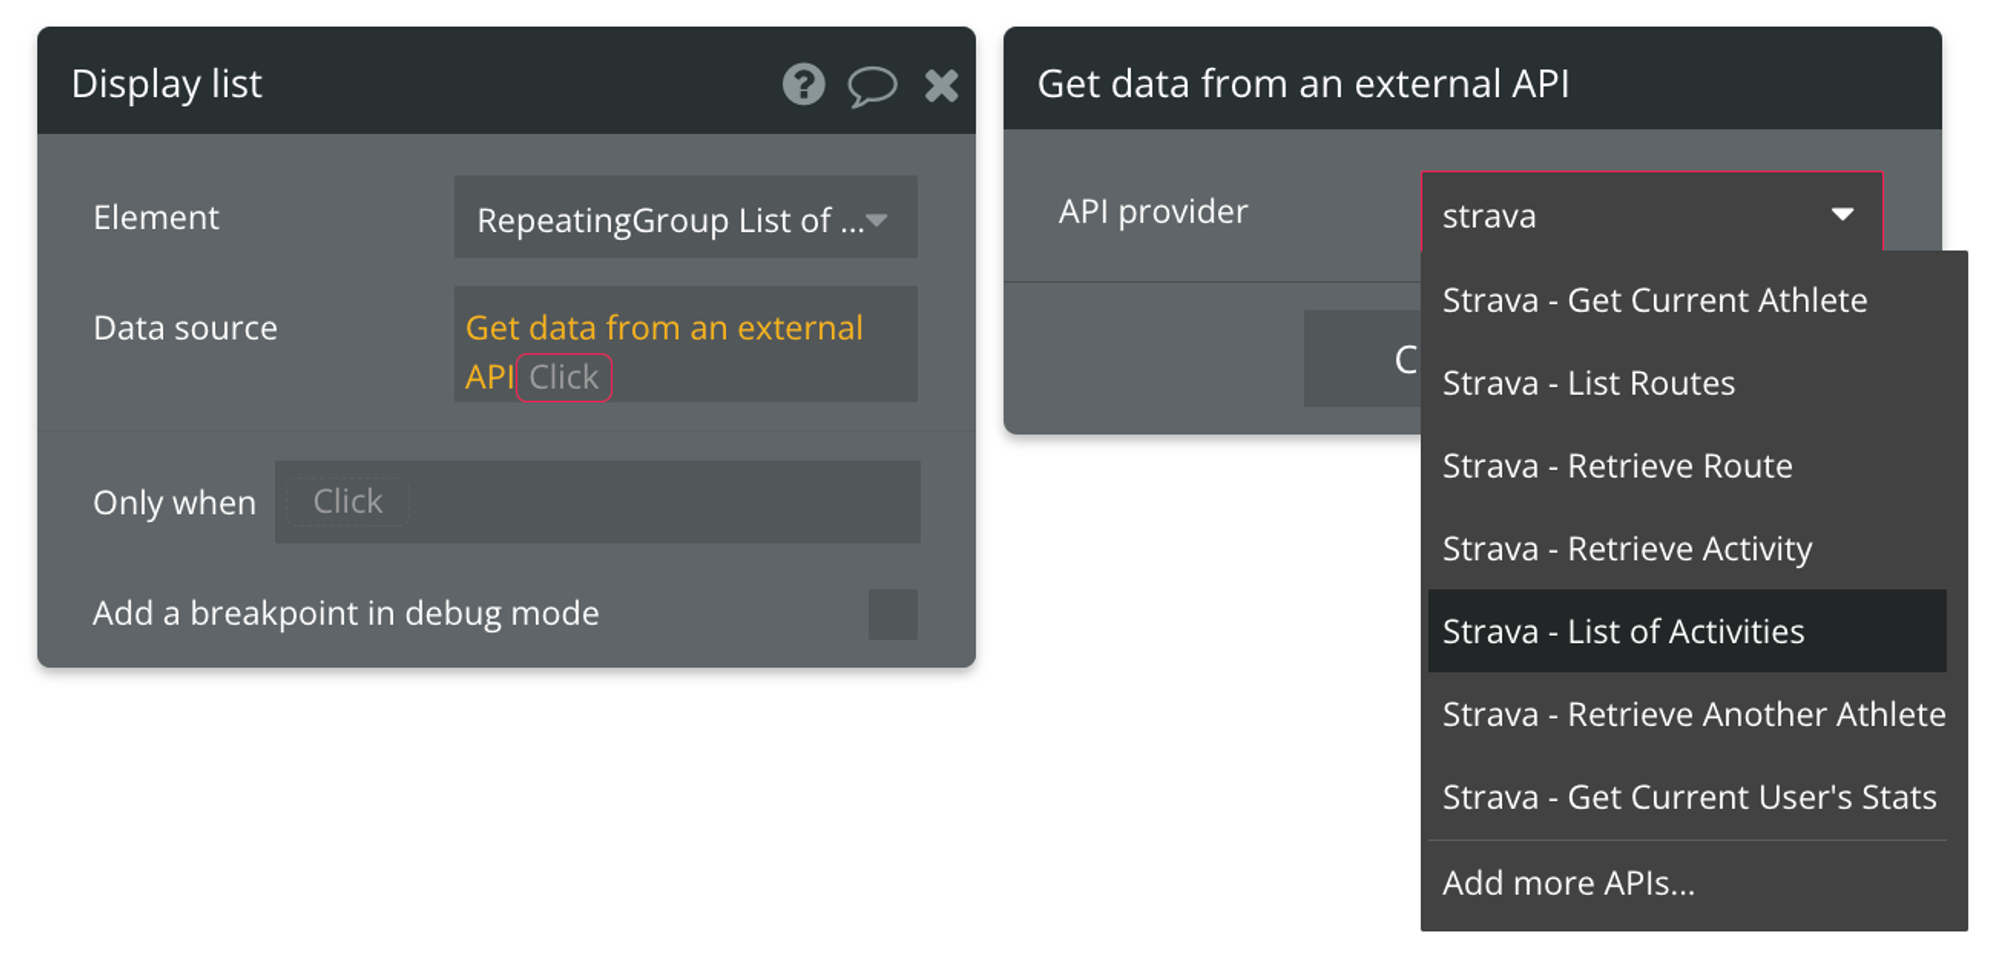 Select "Get data from external API" from the list of data sources, then find Strava - List of Activities from the list of API providers